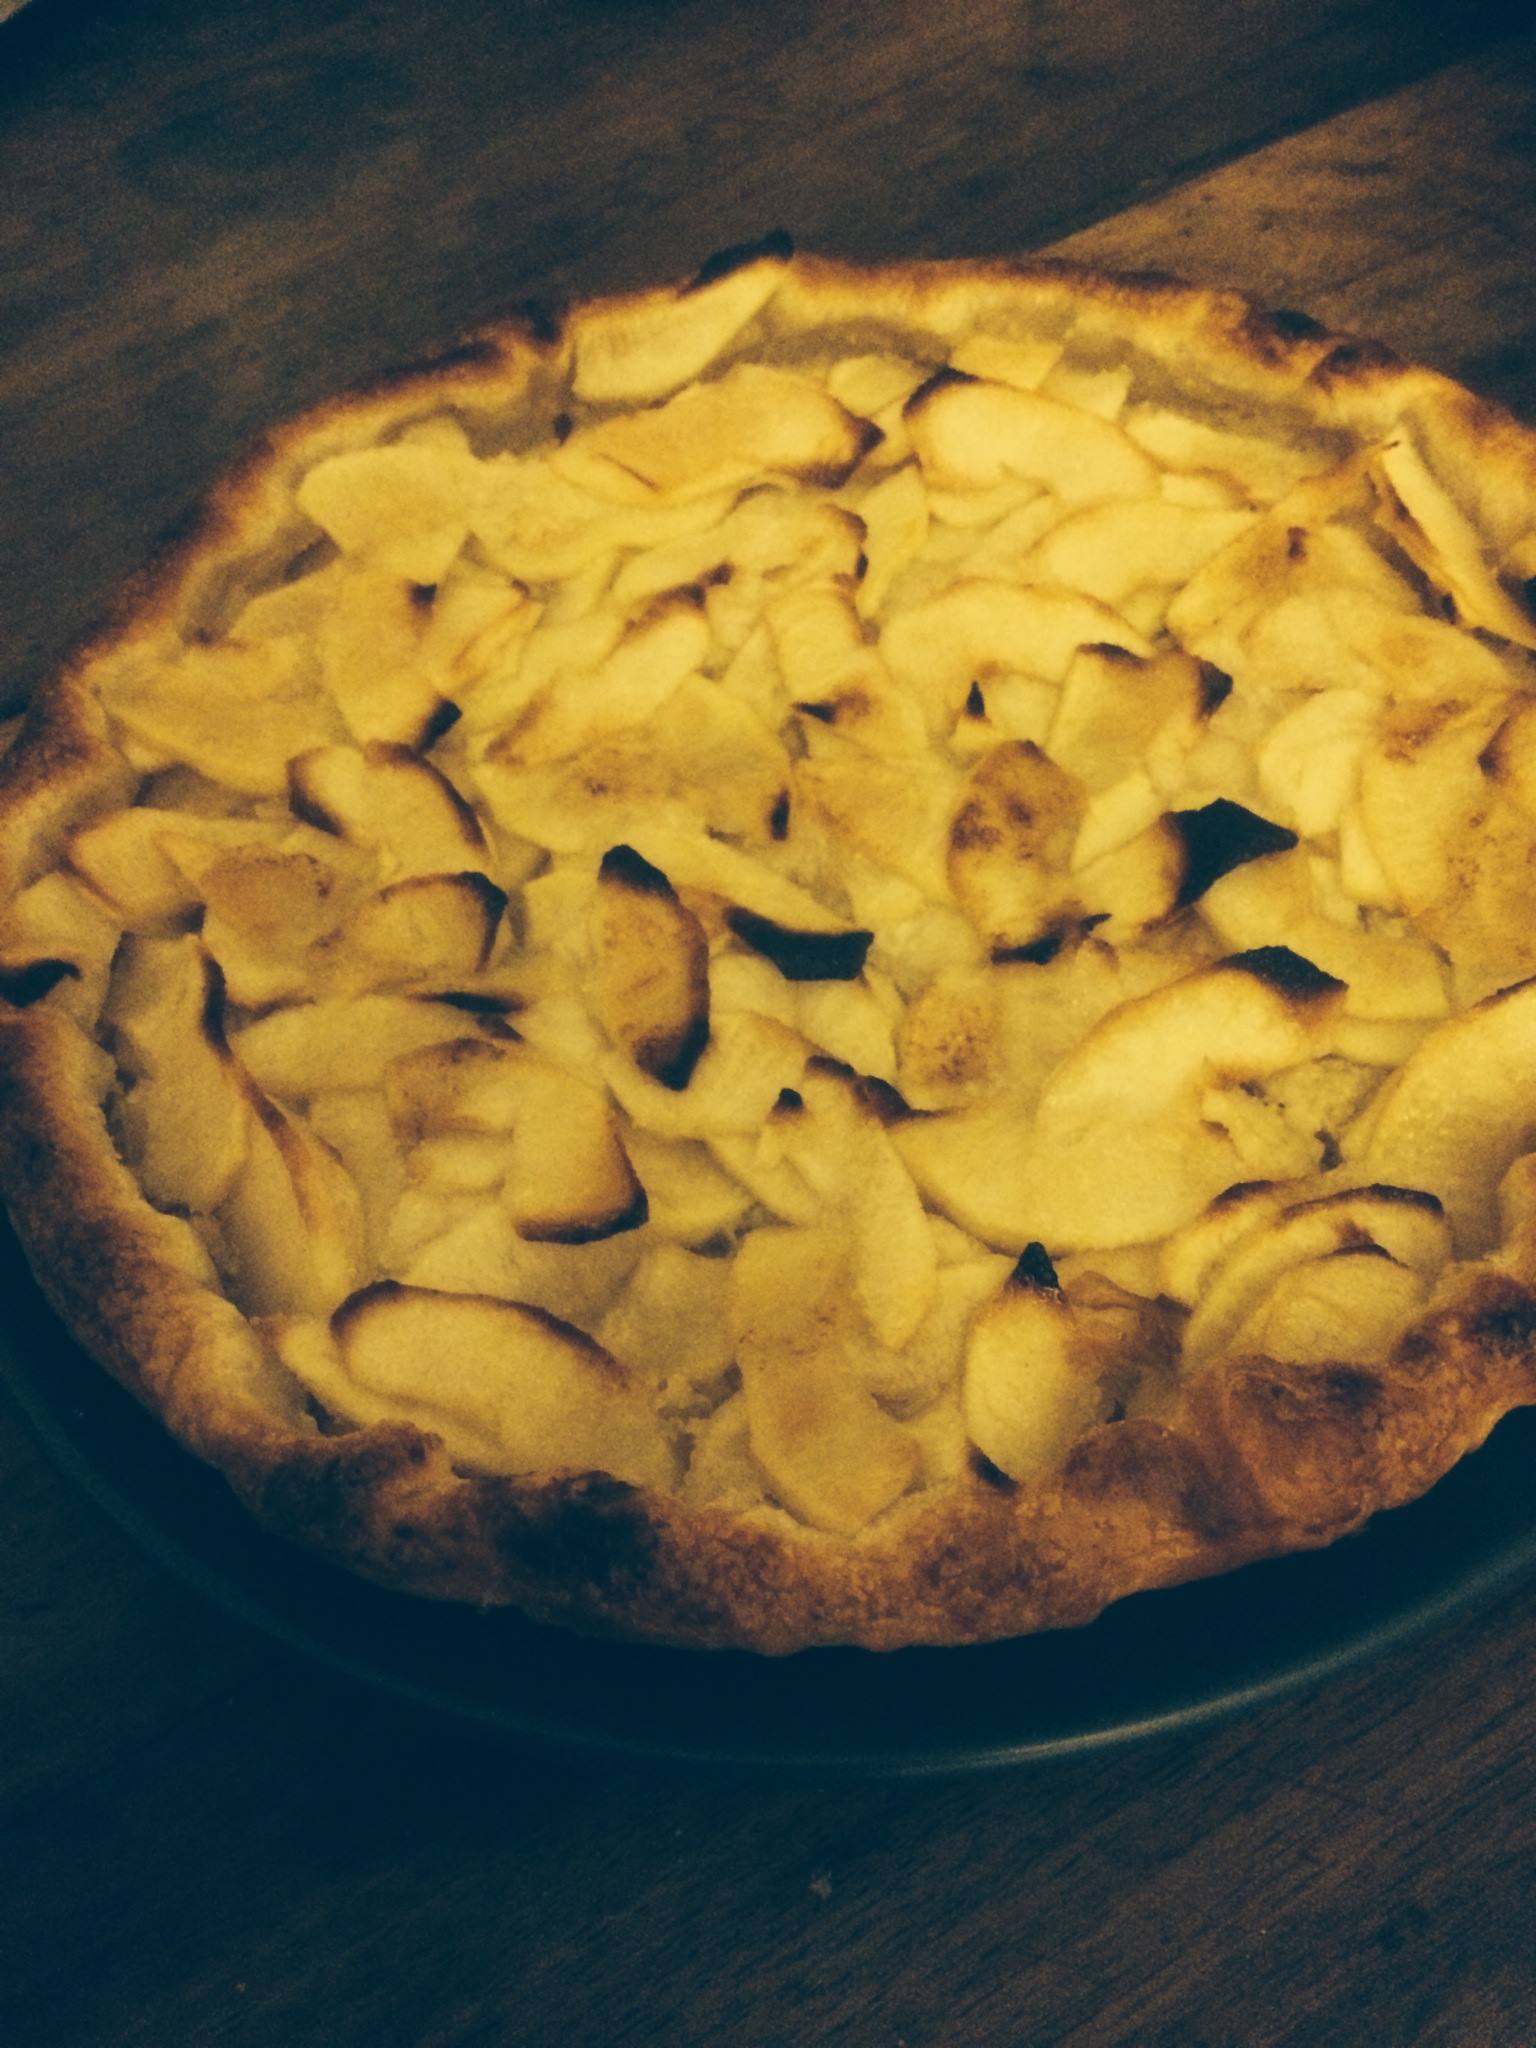 You are currently viewing TARTE POMMES-AMANDES-CARAMEL AU BEURRE SALÉ